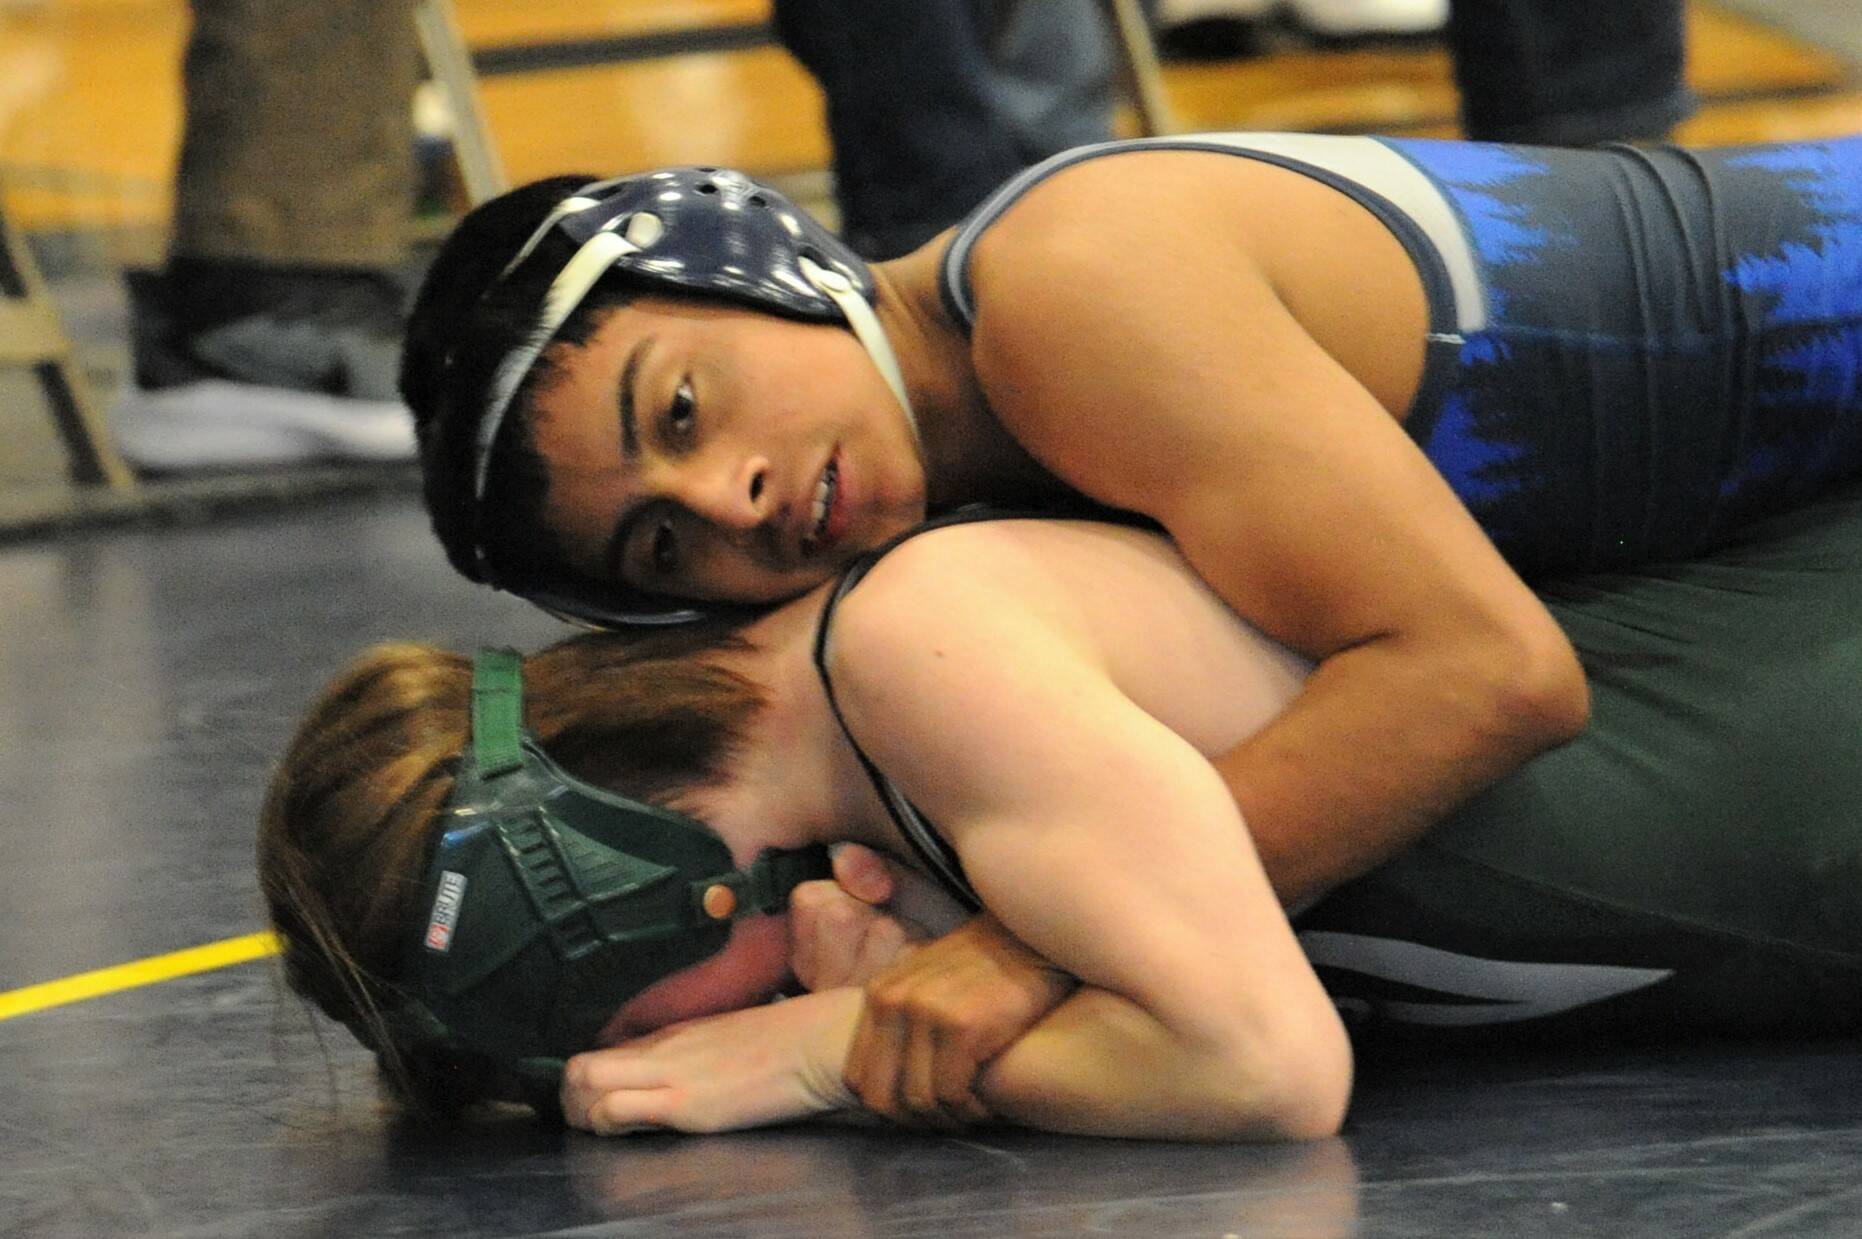 Spartan Bryan Lucas won 18 to 16 over Port Angeles’ Newton in the 120 lb class.